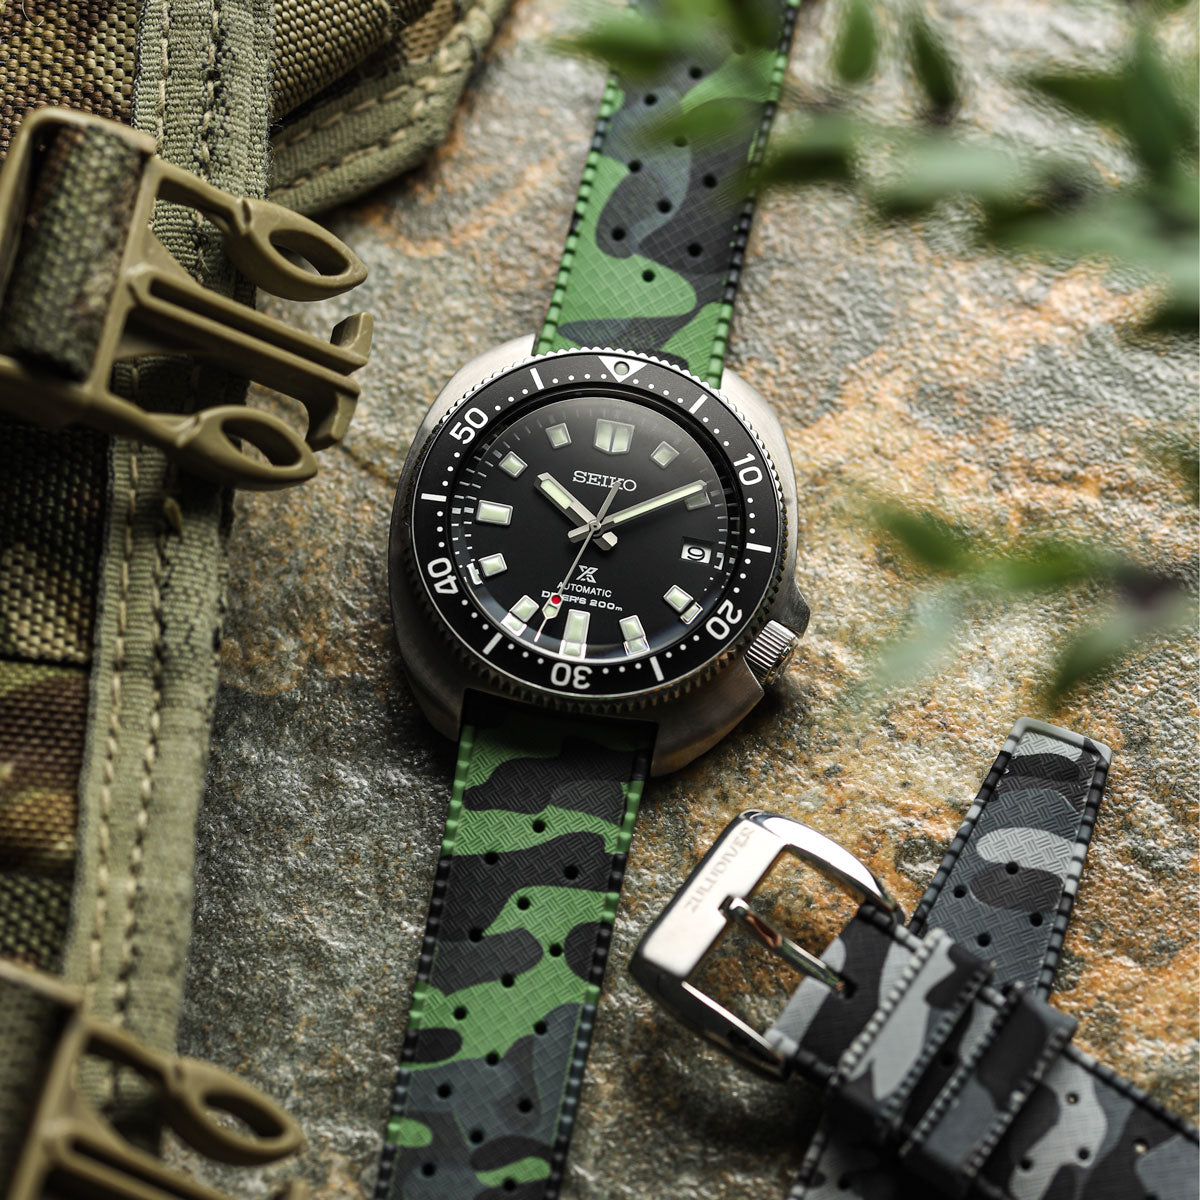 ZULUDIVER Tropical Style Camo Rubber Watch Strap - Blue - additional image 3